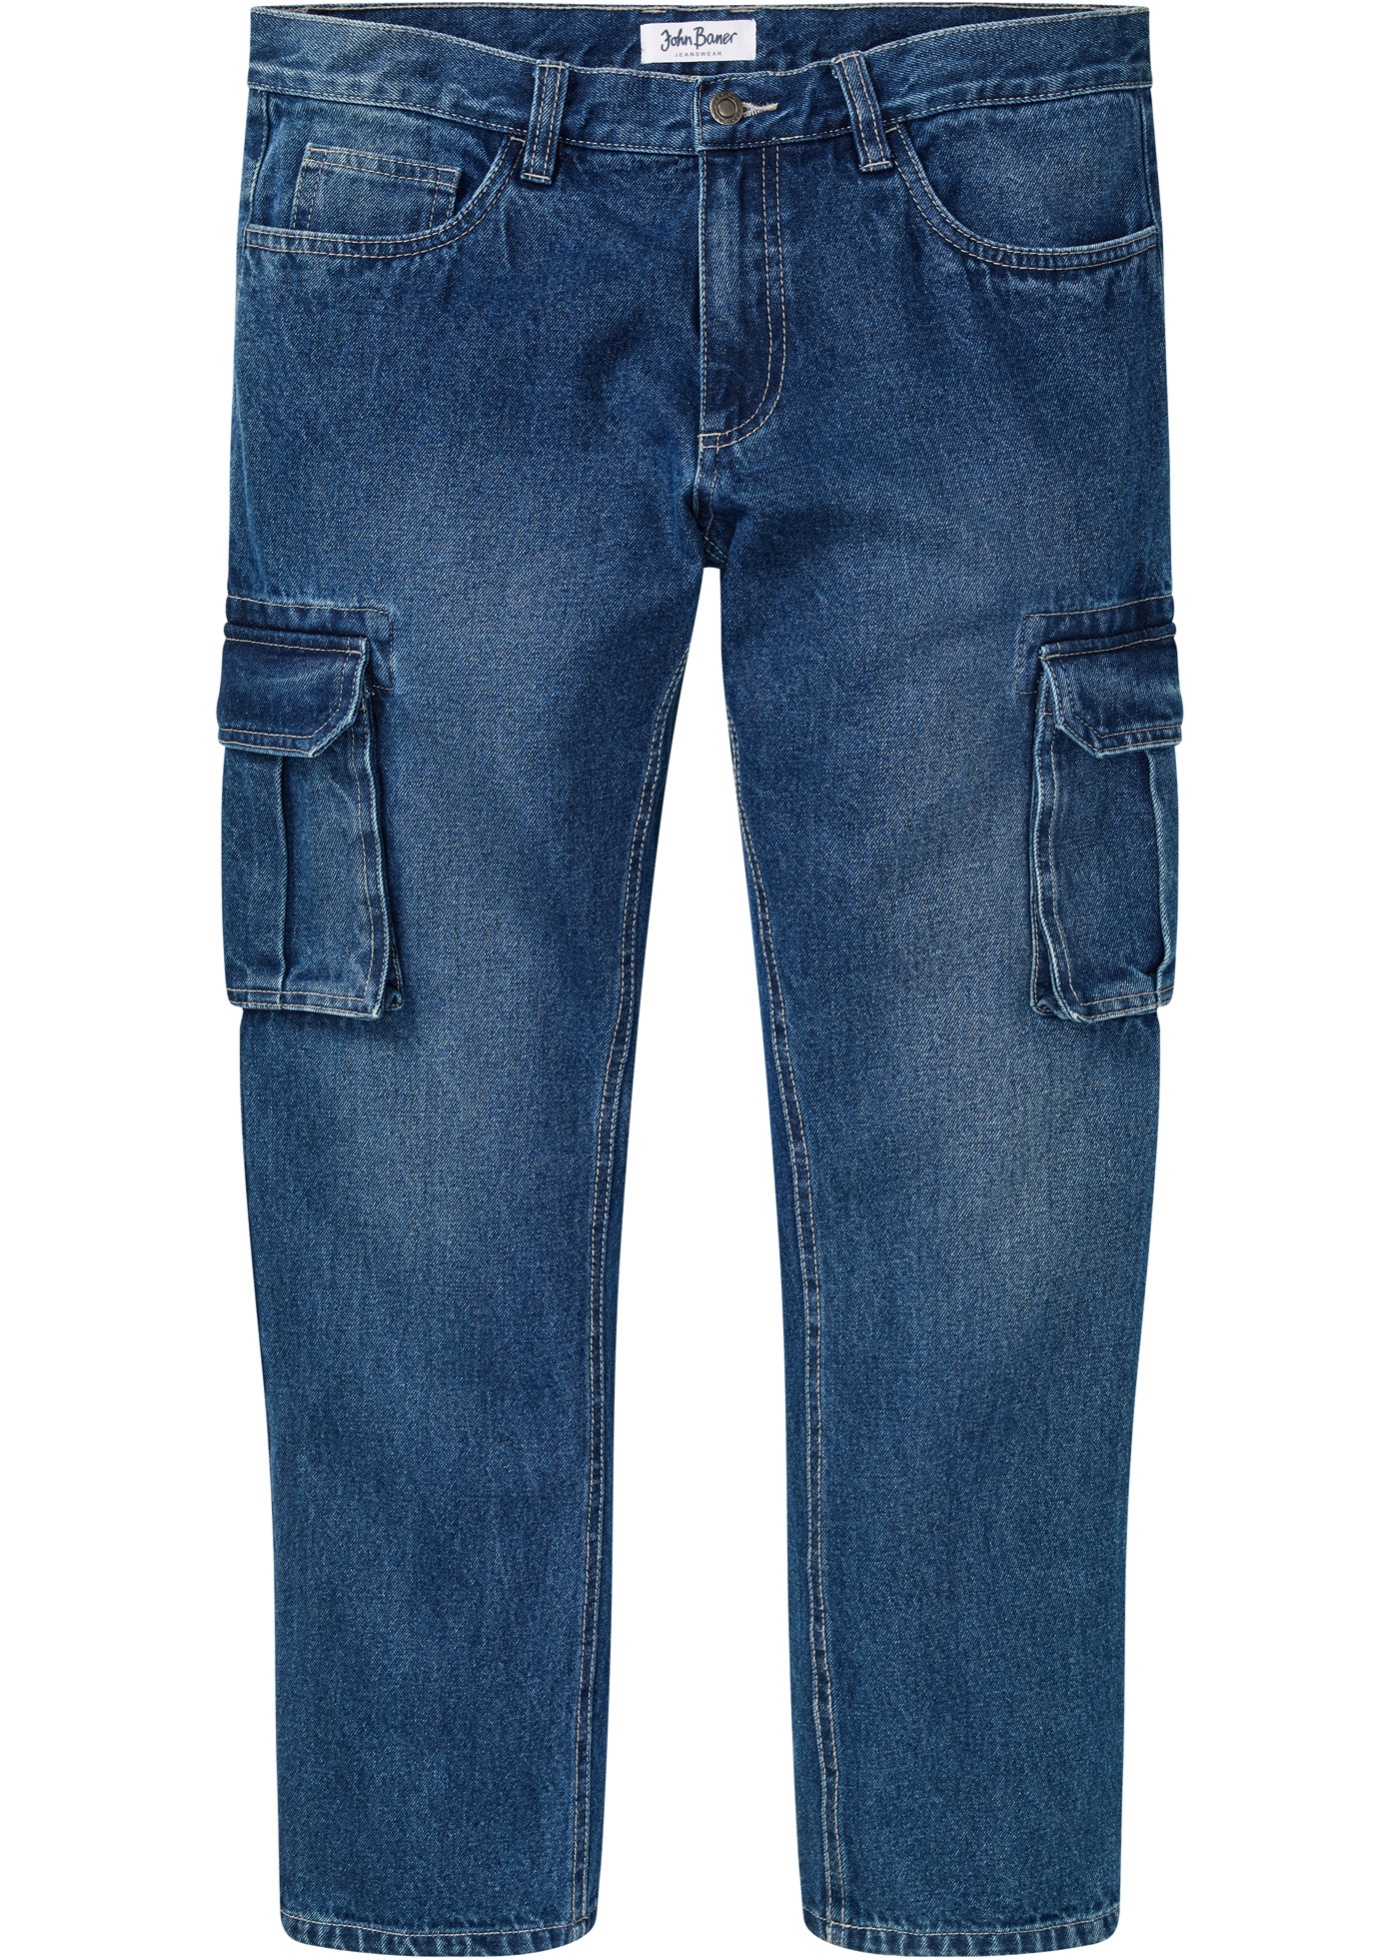 jean cargo loose fit, straight